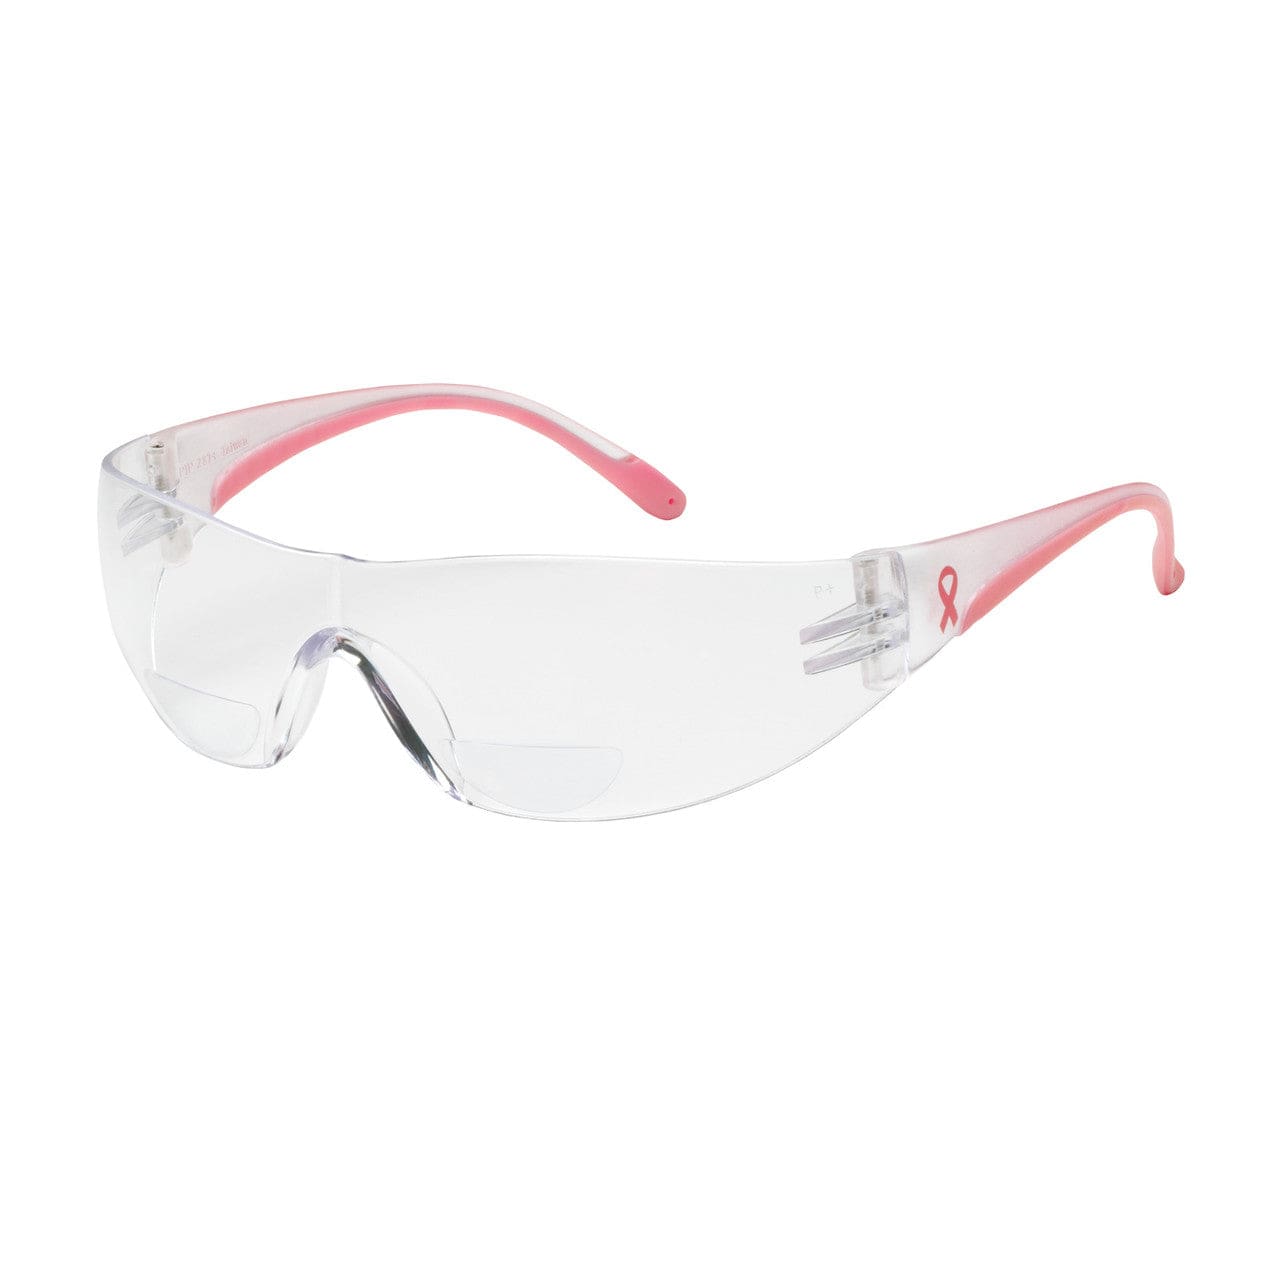 safety glasses for pickleball women, small gifts for him